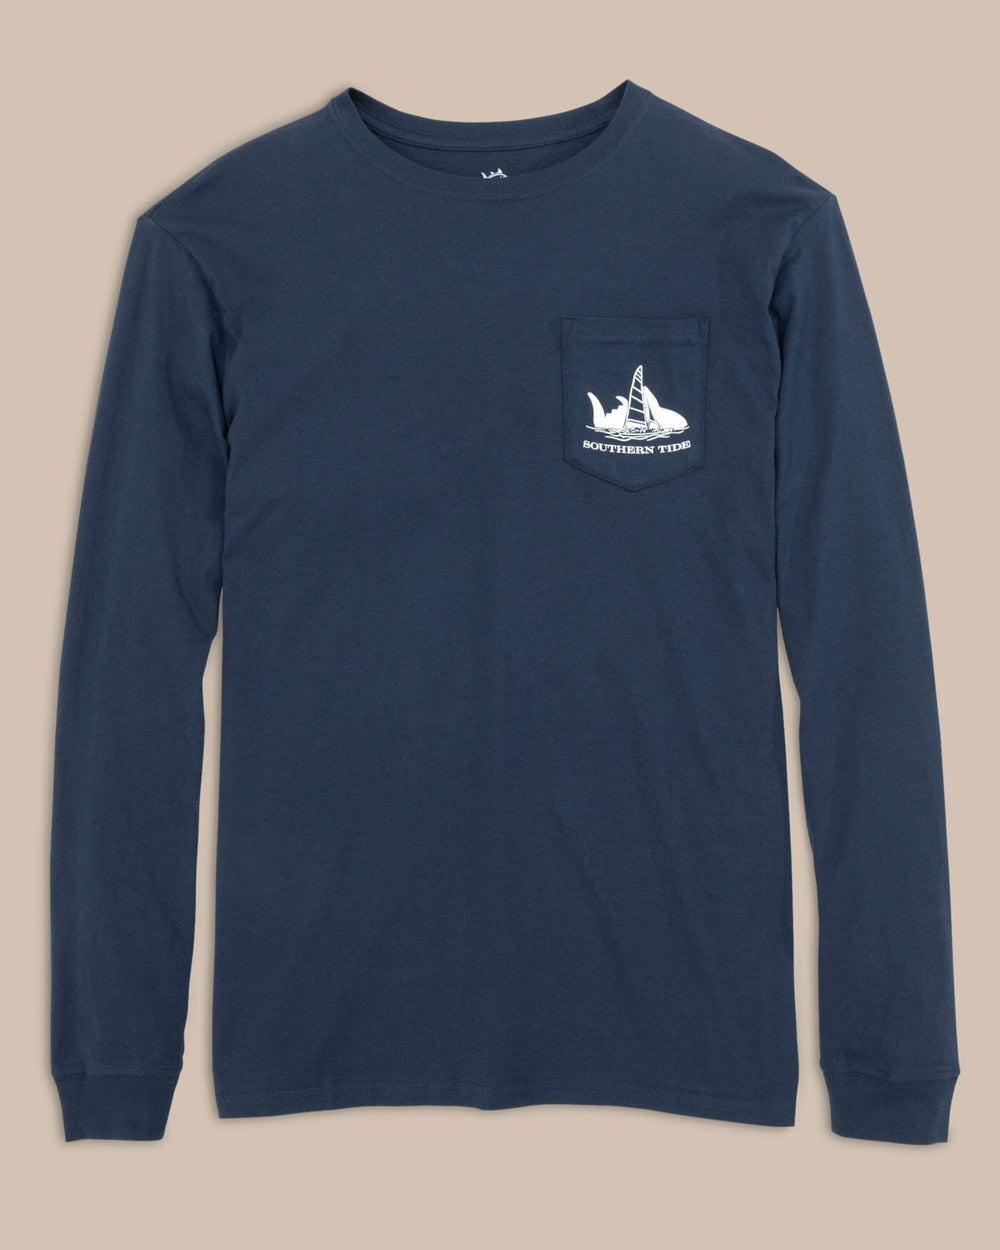 The front view of the Sunset Silhouette Long Sleeve T-Shirt by Southern Tide - Navy